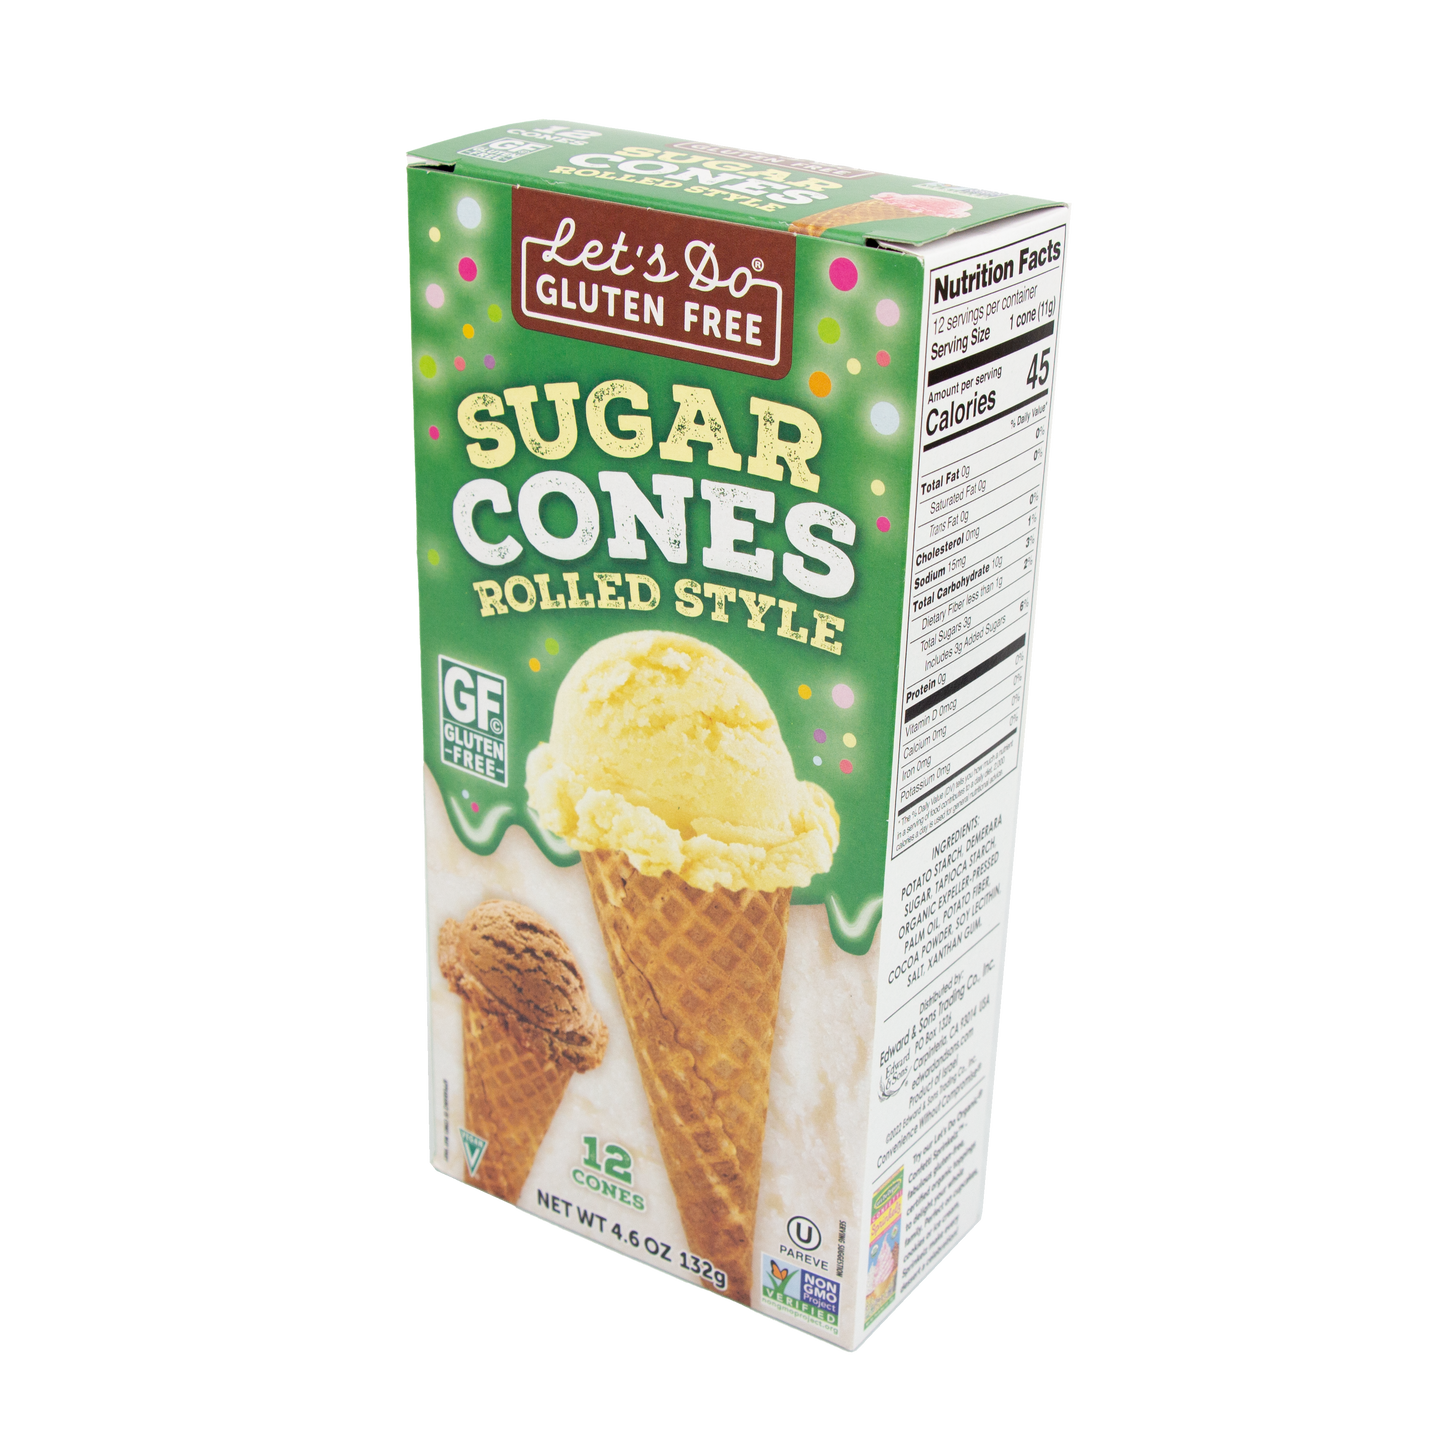 Let's Do Gluten Free Sugar Cones Rolled Style